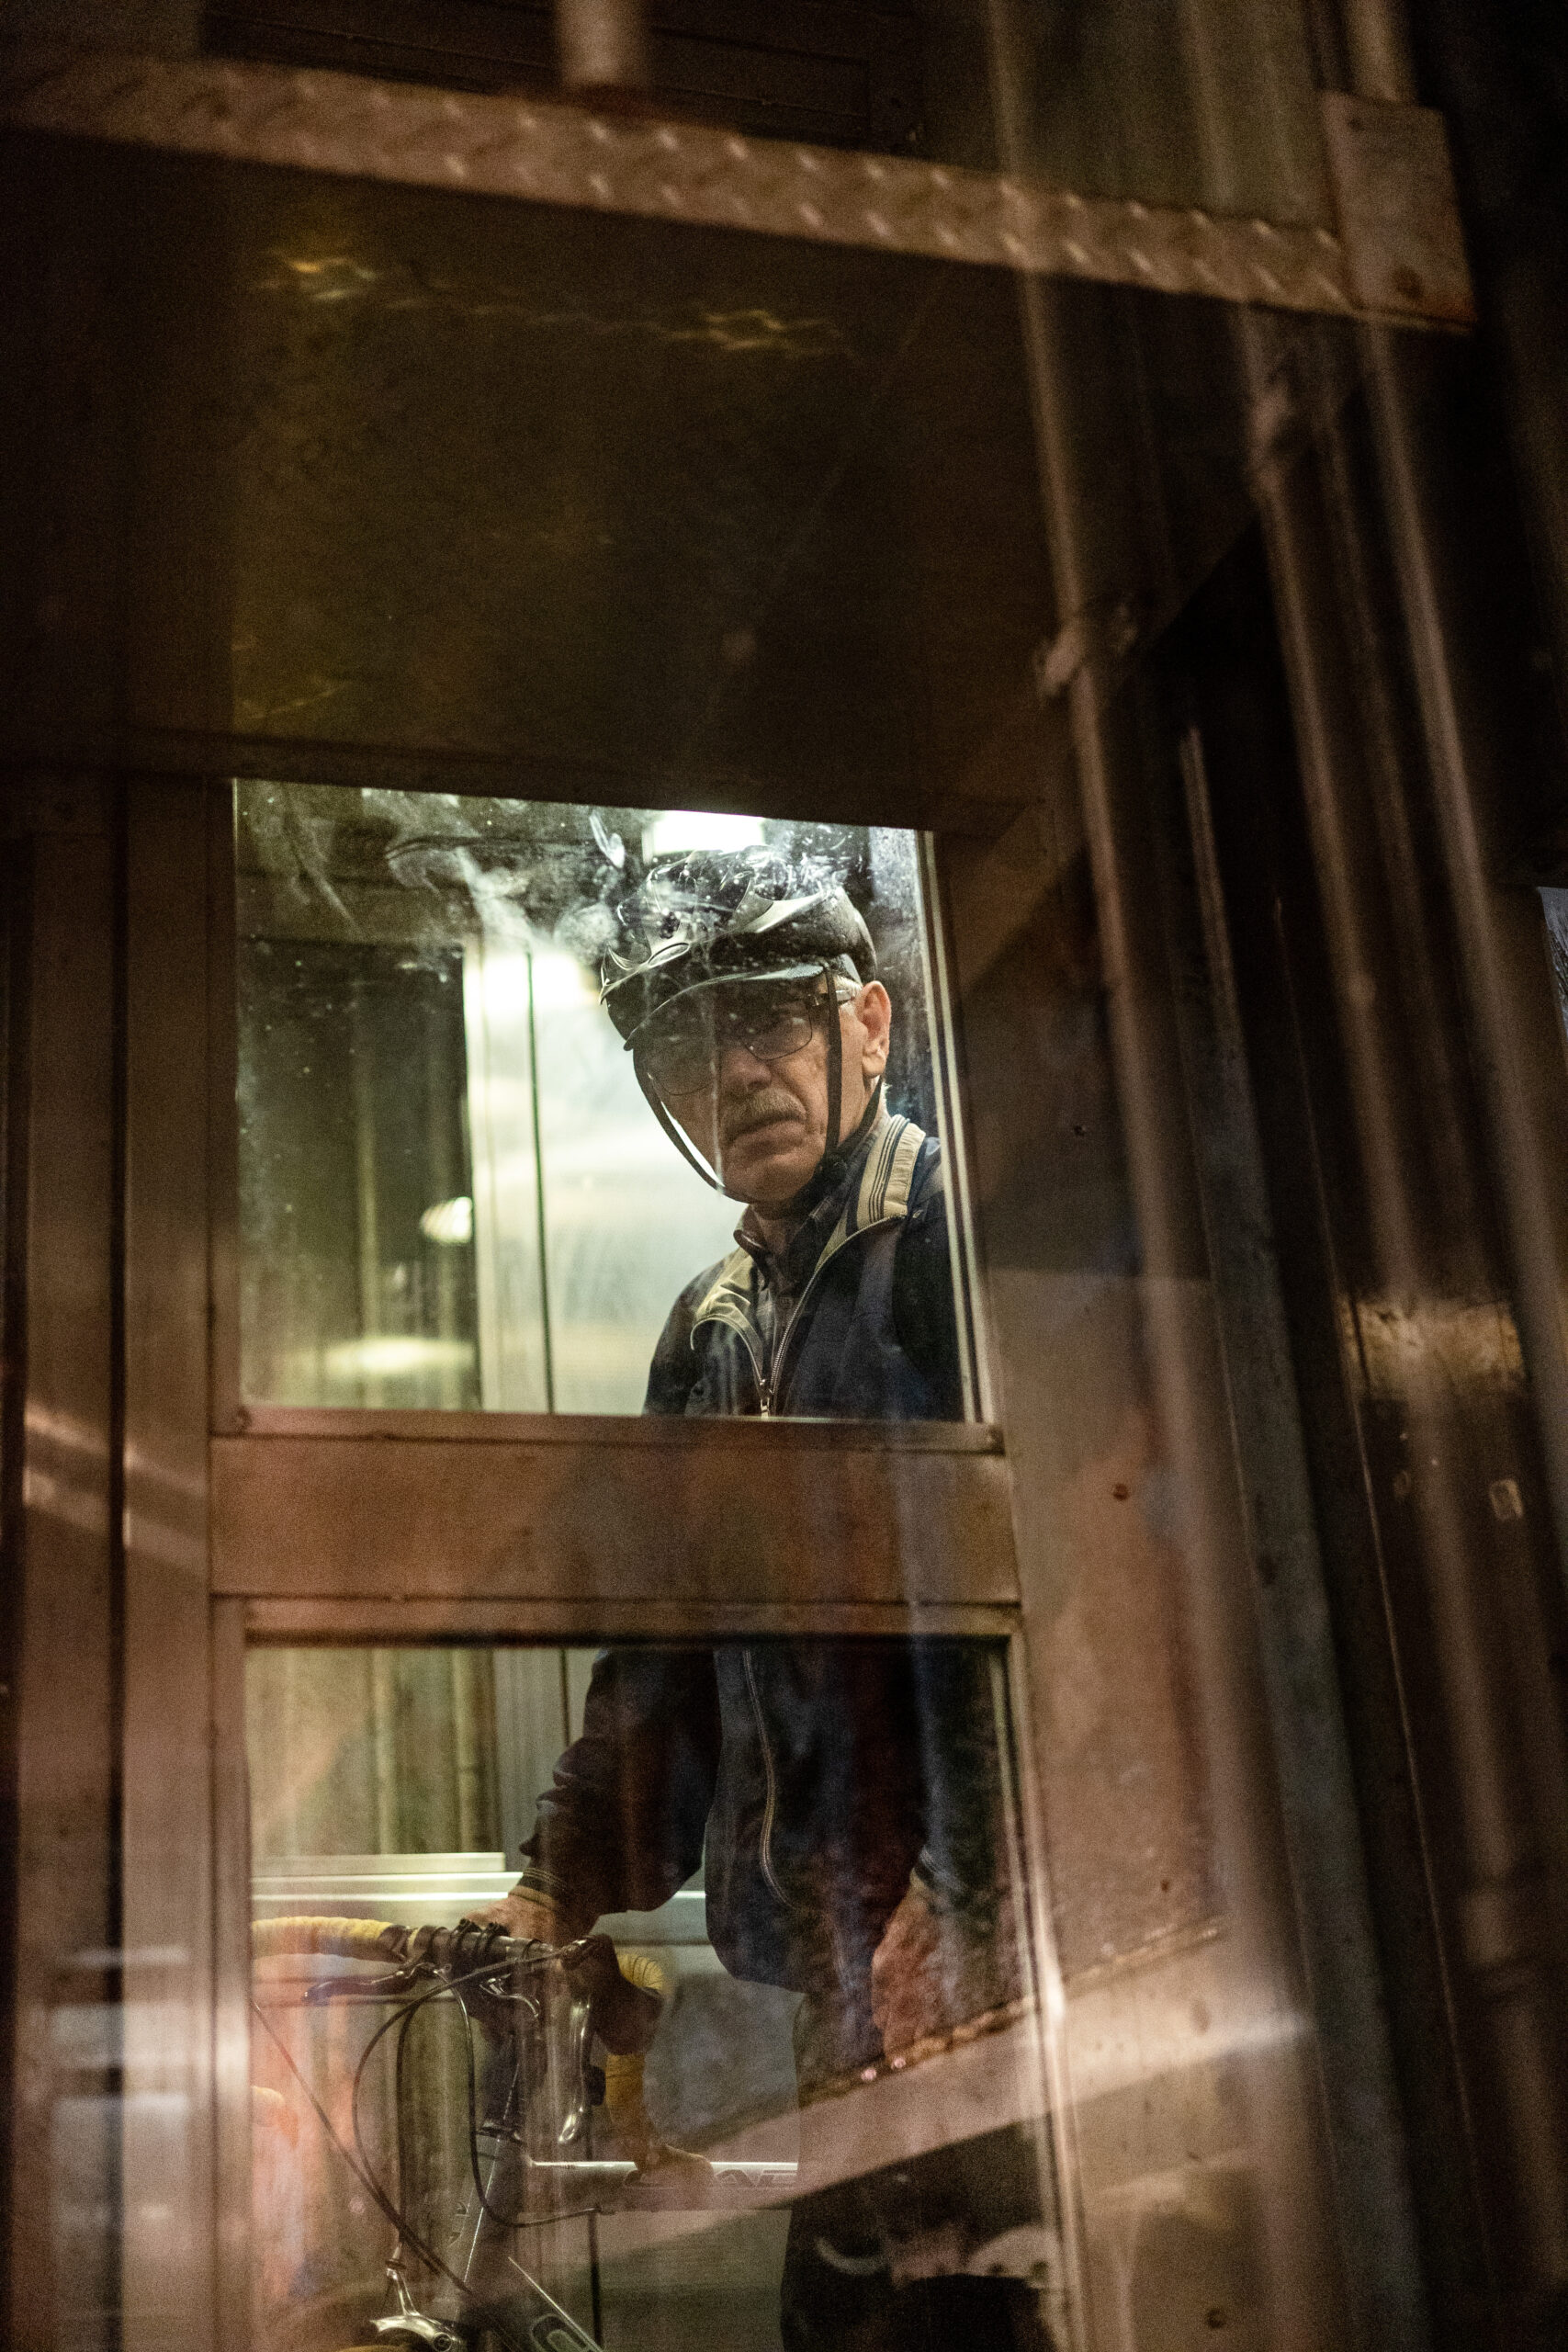 Trapped behind a grid of glass and metal a man looks down, directly into the lens with slight confusion. Luminescent light shines from abroad and illuminates the smudges and grim on the glass. He is wearing a biking helmet and holding onto a bike.